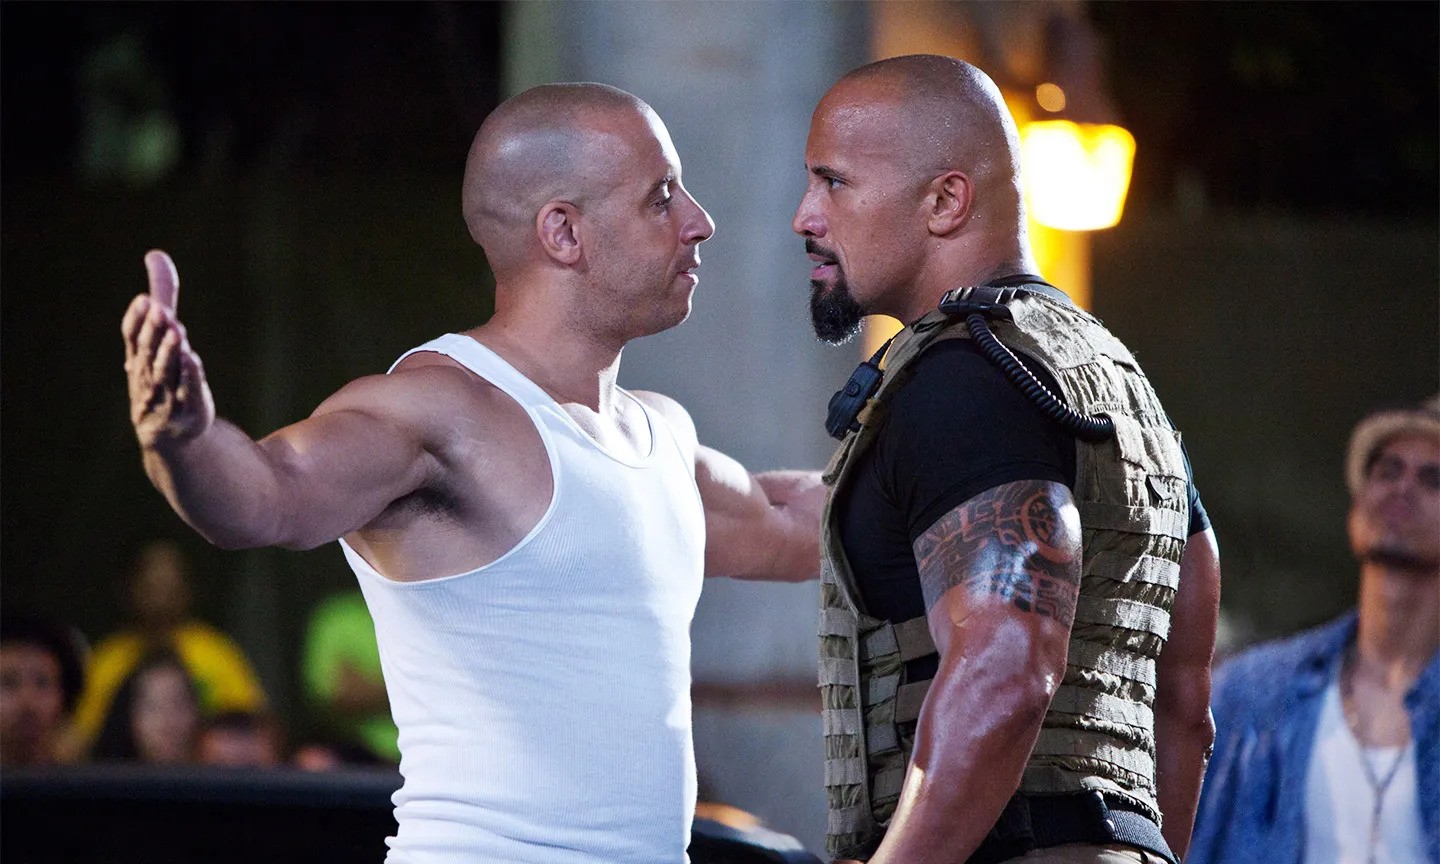 Vin Diesel and The Rock's feud shows no sign of cooling down